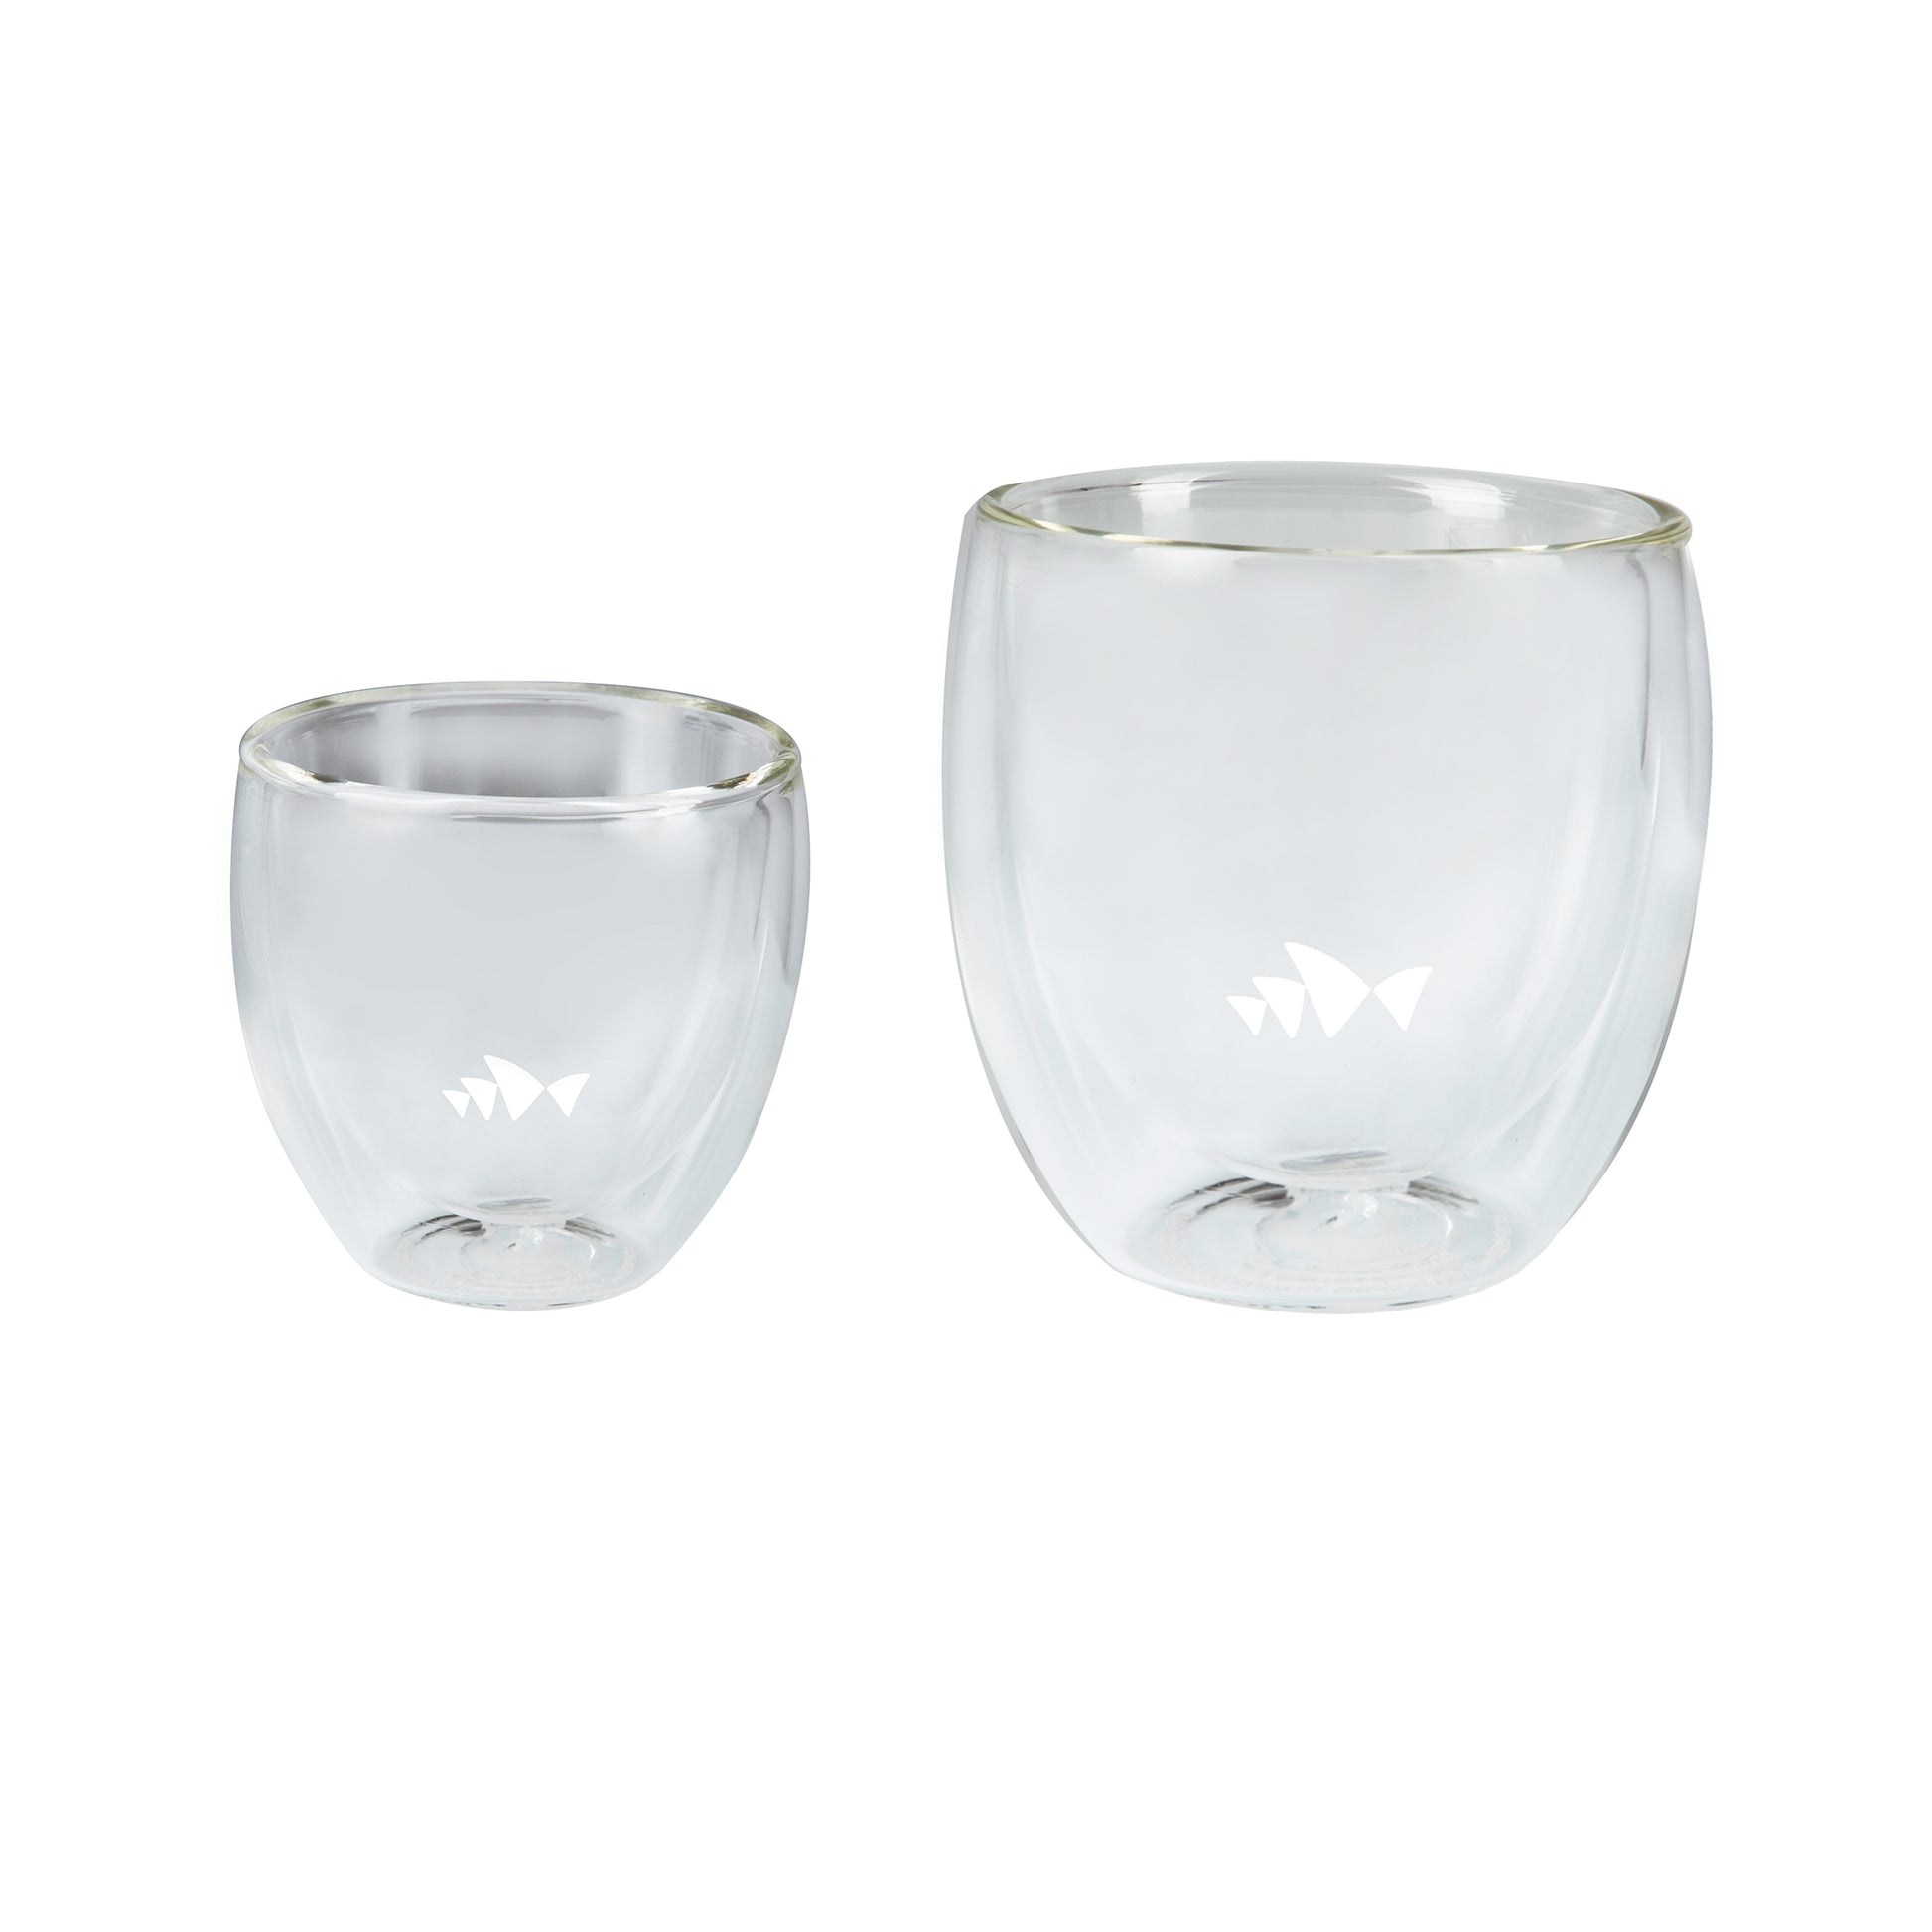 Double Wall Glasses by Bodum